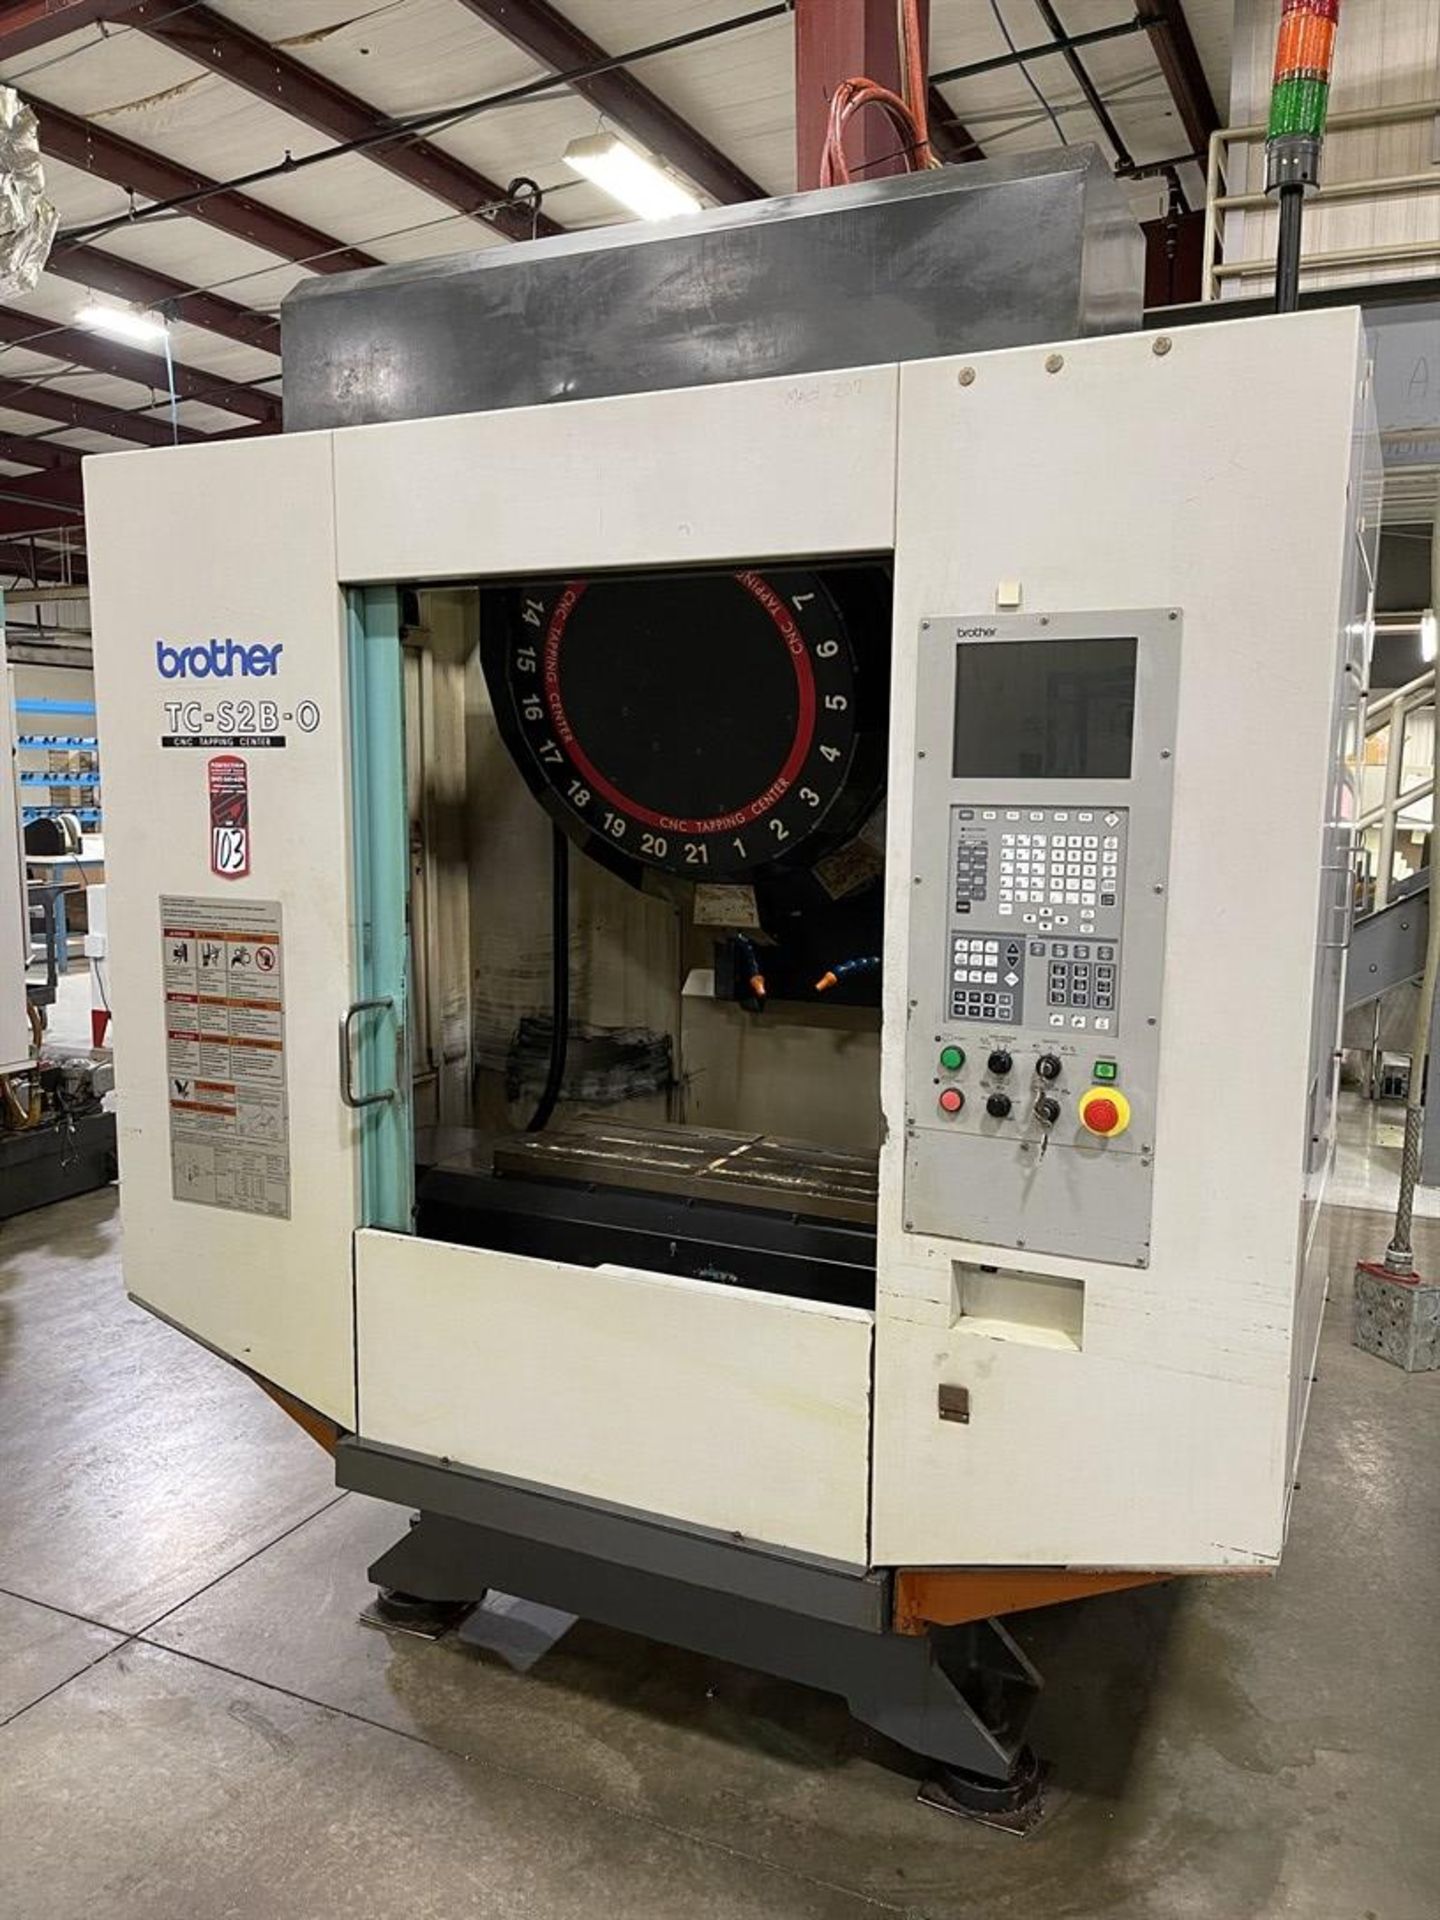 2003 BROTHER TC-S2B-O CNC Tapping Center, s/n 11331, 12.5" x 31.5" Table, 21+-ATC, BT30 Taper, 27.